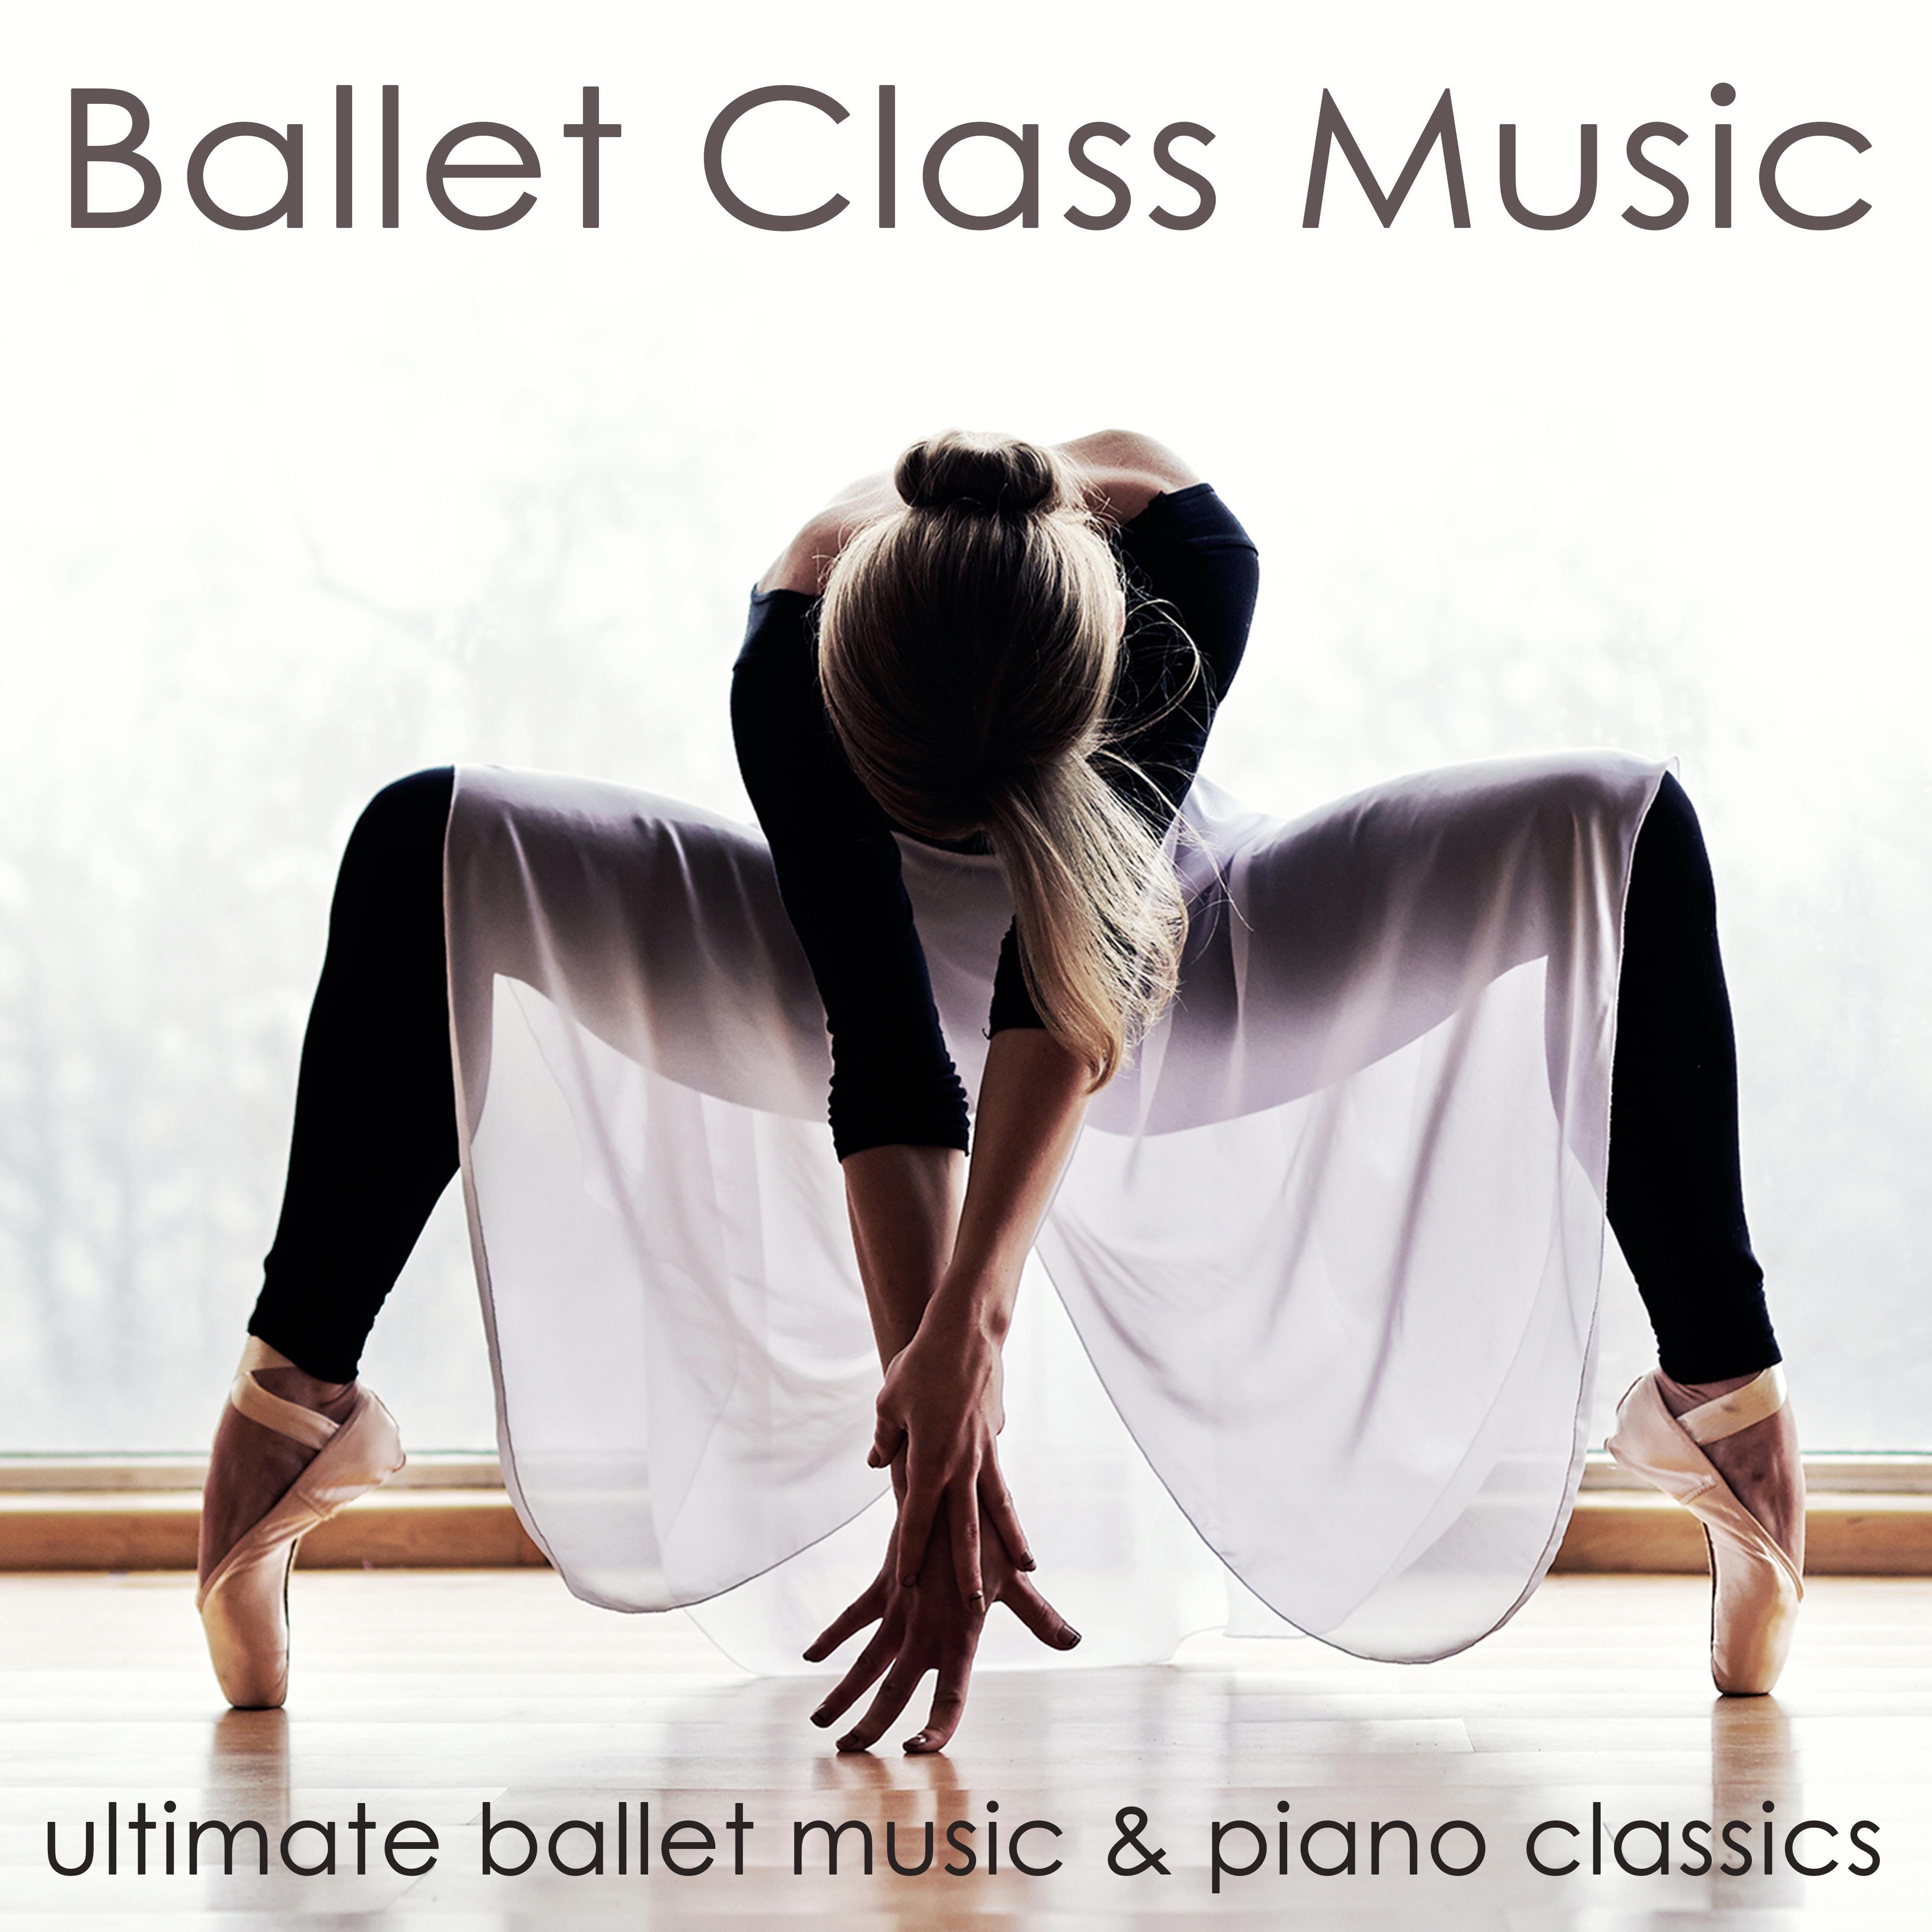 Ballet Class Music  Ultimate Ballet Music  Piano Classics for Dance Lessons, Ballet Barre, Modern Ballet  Coreography